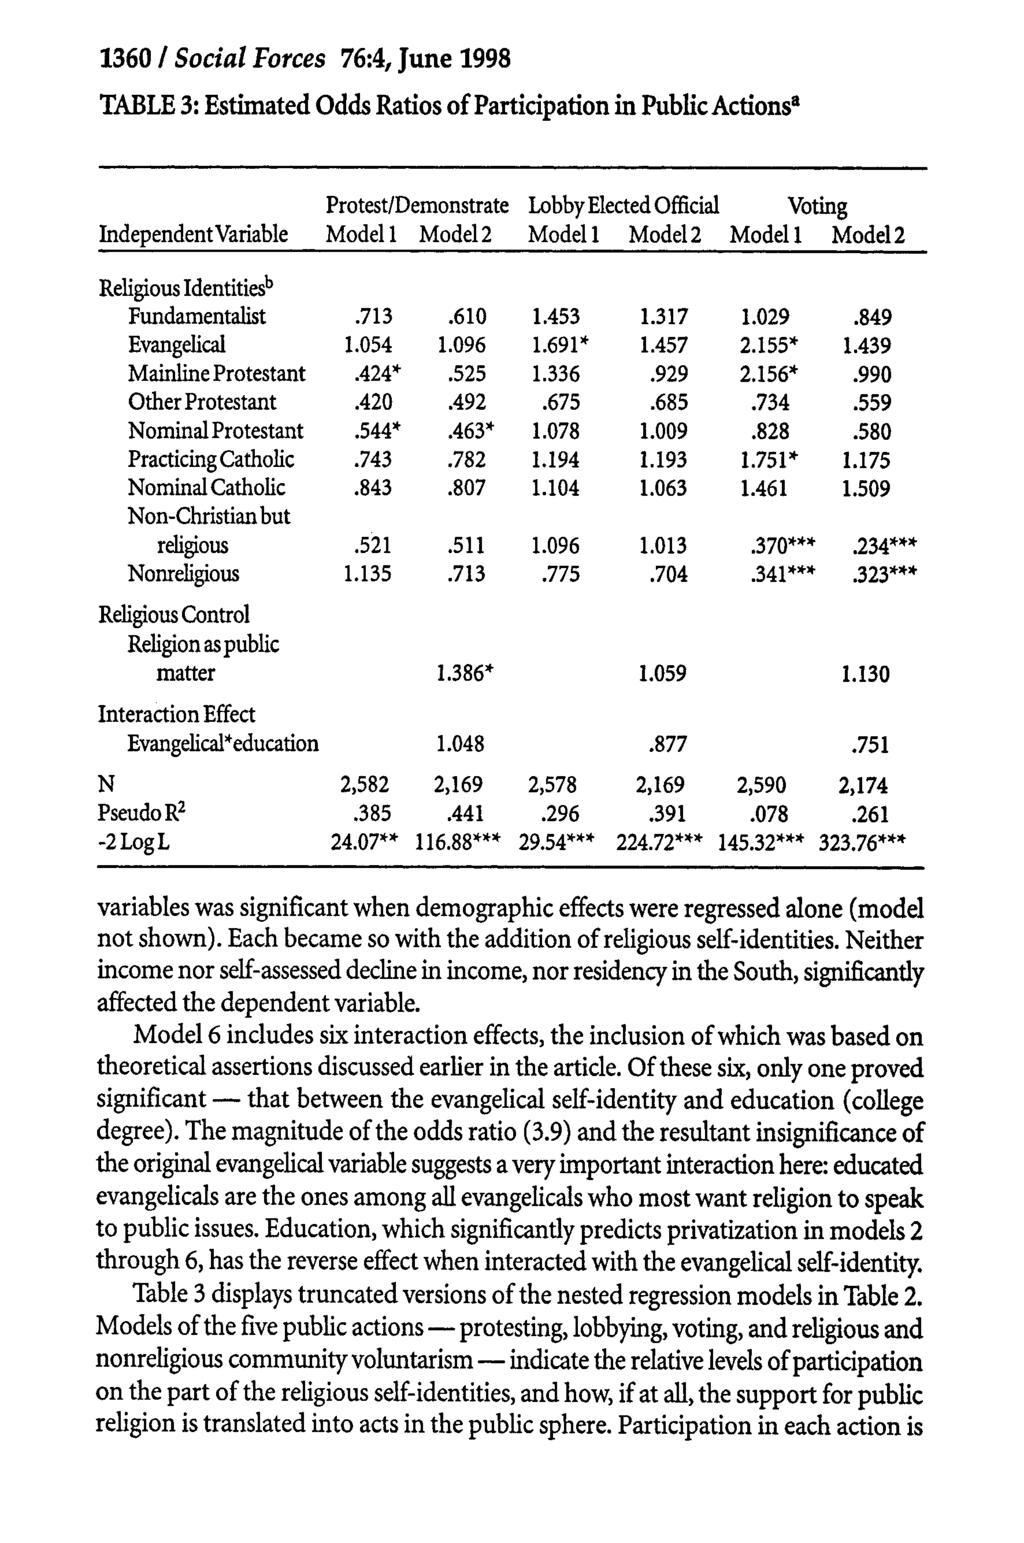 1360 / Social Forces 76:4, June 1998 TABLE 3: Estimated Odds Ratios of Participation in Public Actionsa Independent Variable Protest/Demonstrate Model 1 Model 2 Lobby Elected Official Modell Model2